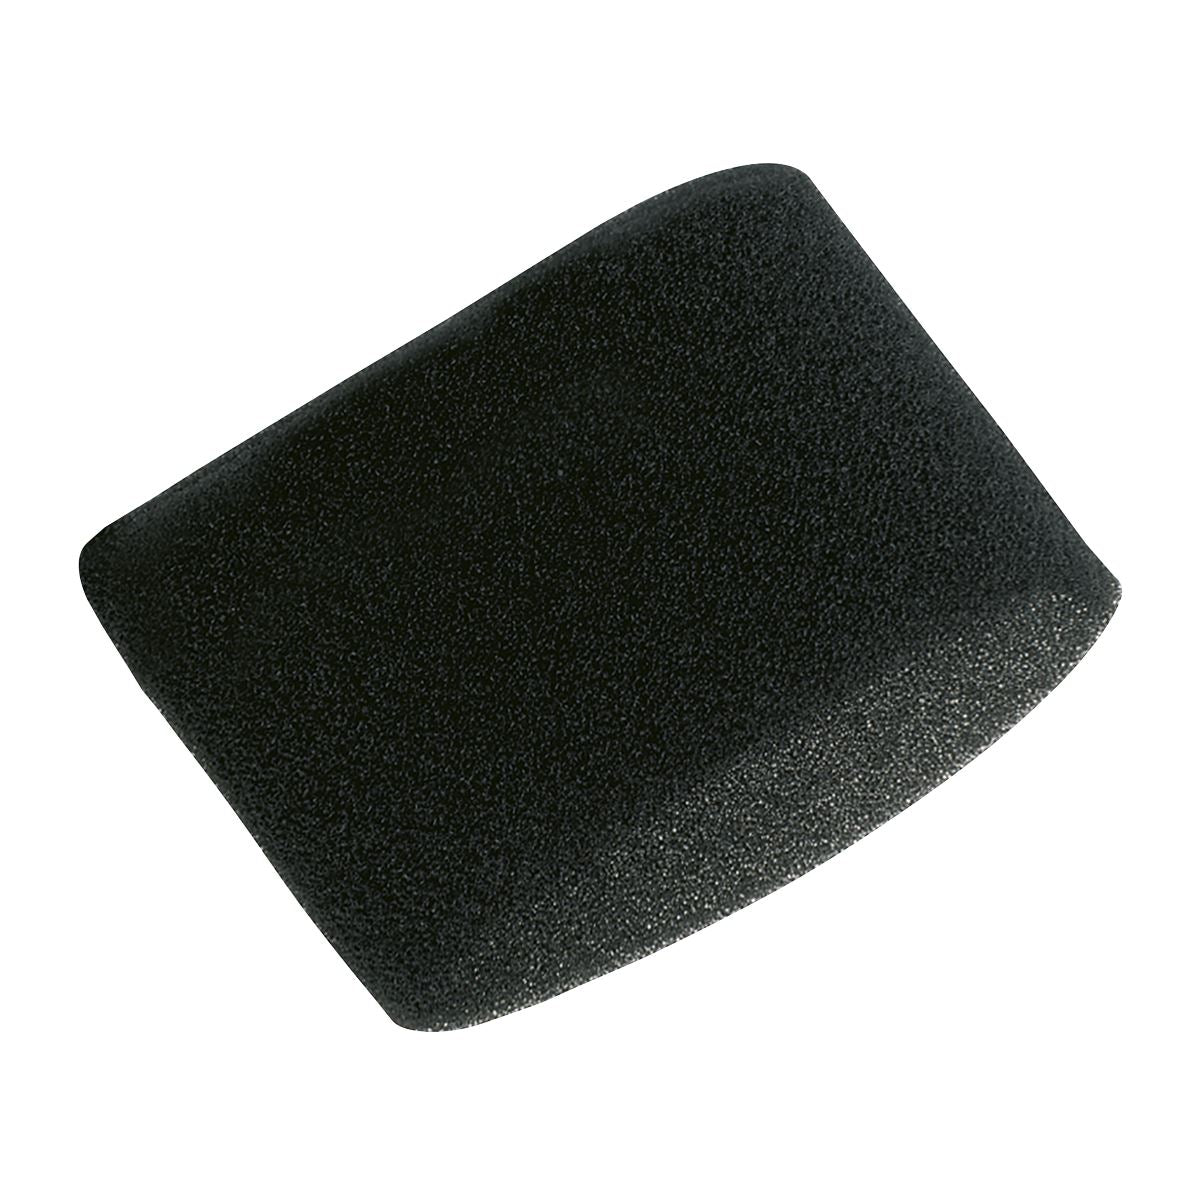 Sealey Foam Filter for PC200 & PC300 Series Pack of 10